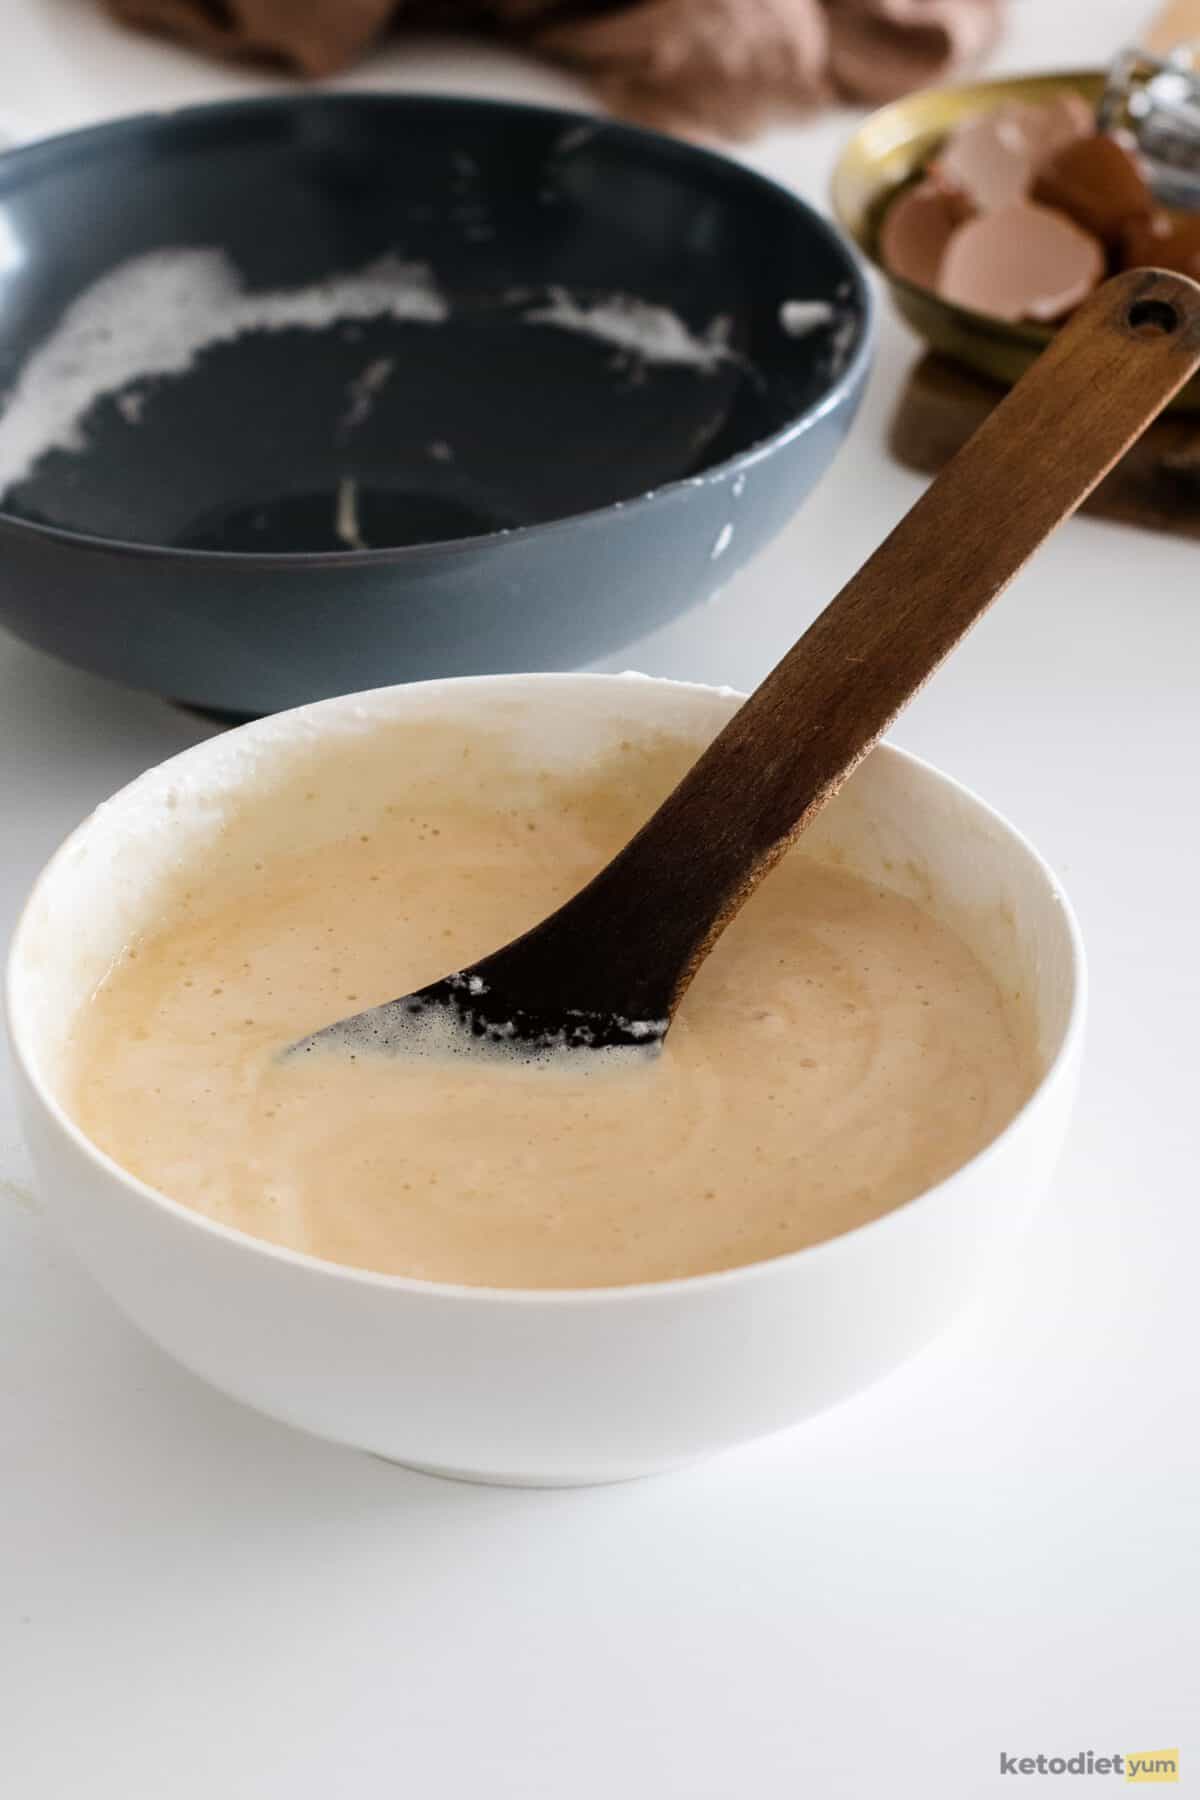 White bowl with a spoon and batter inside with another empty dark blue bowl in the background